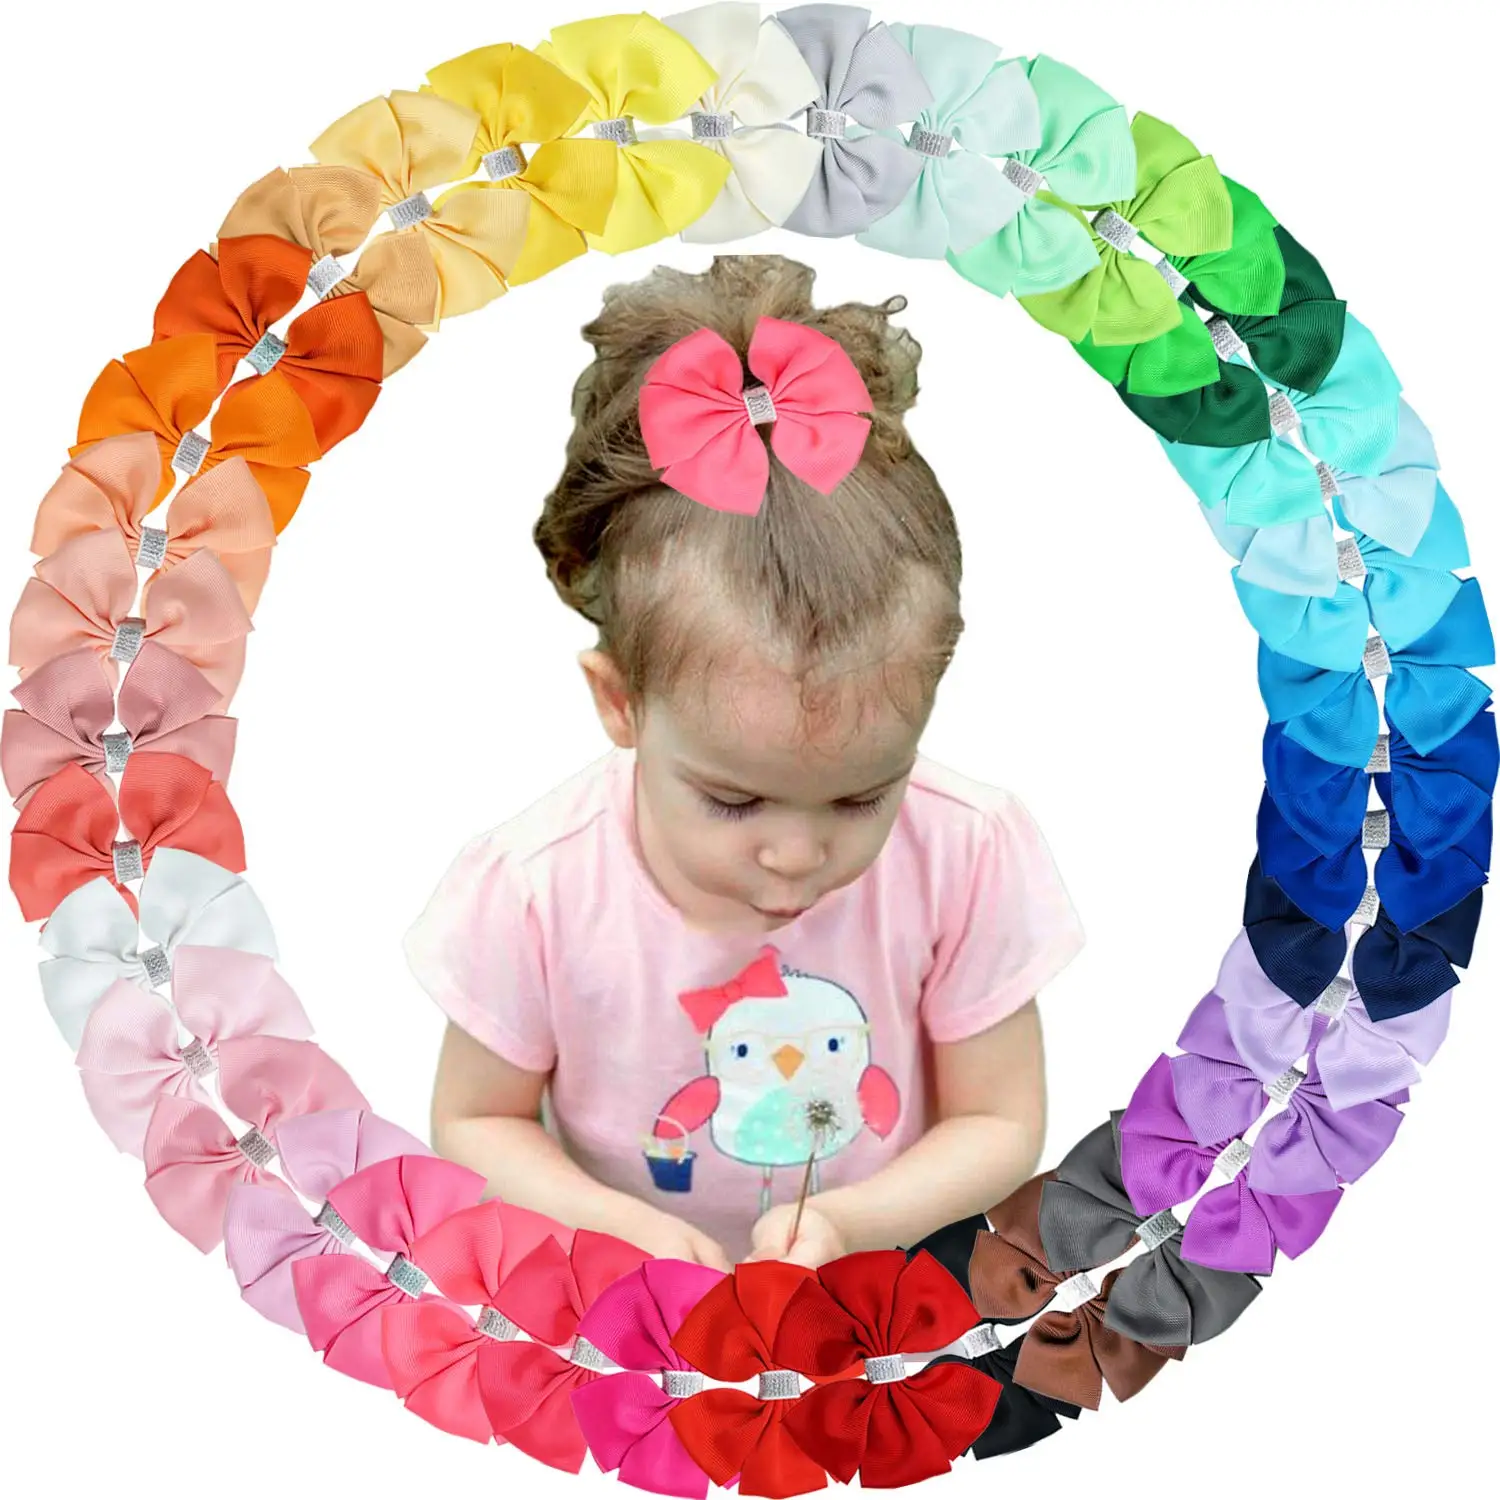 

40 Colors Hair Bows Clips Grosgrain Ribbon Boutique Hairbows Alligator Clips for Baby Girls Toddlers Kids